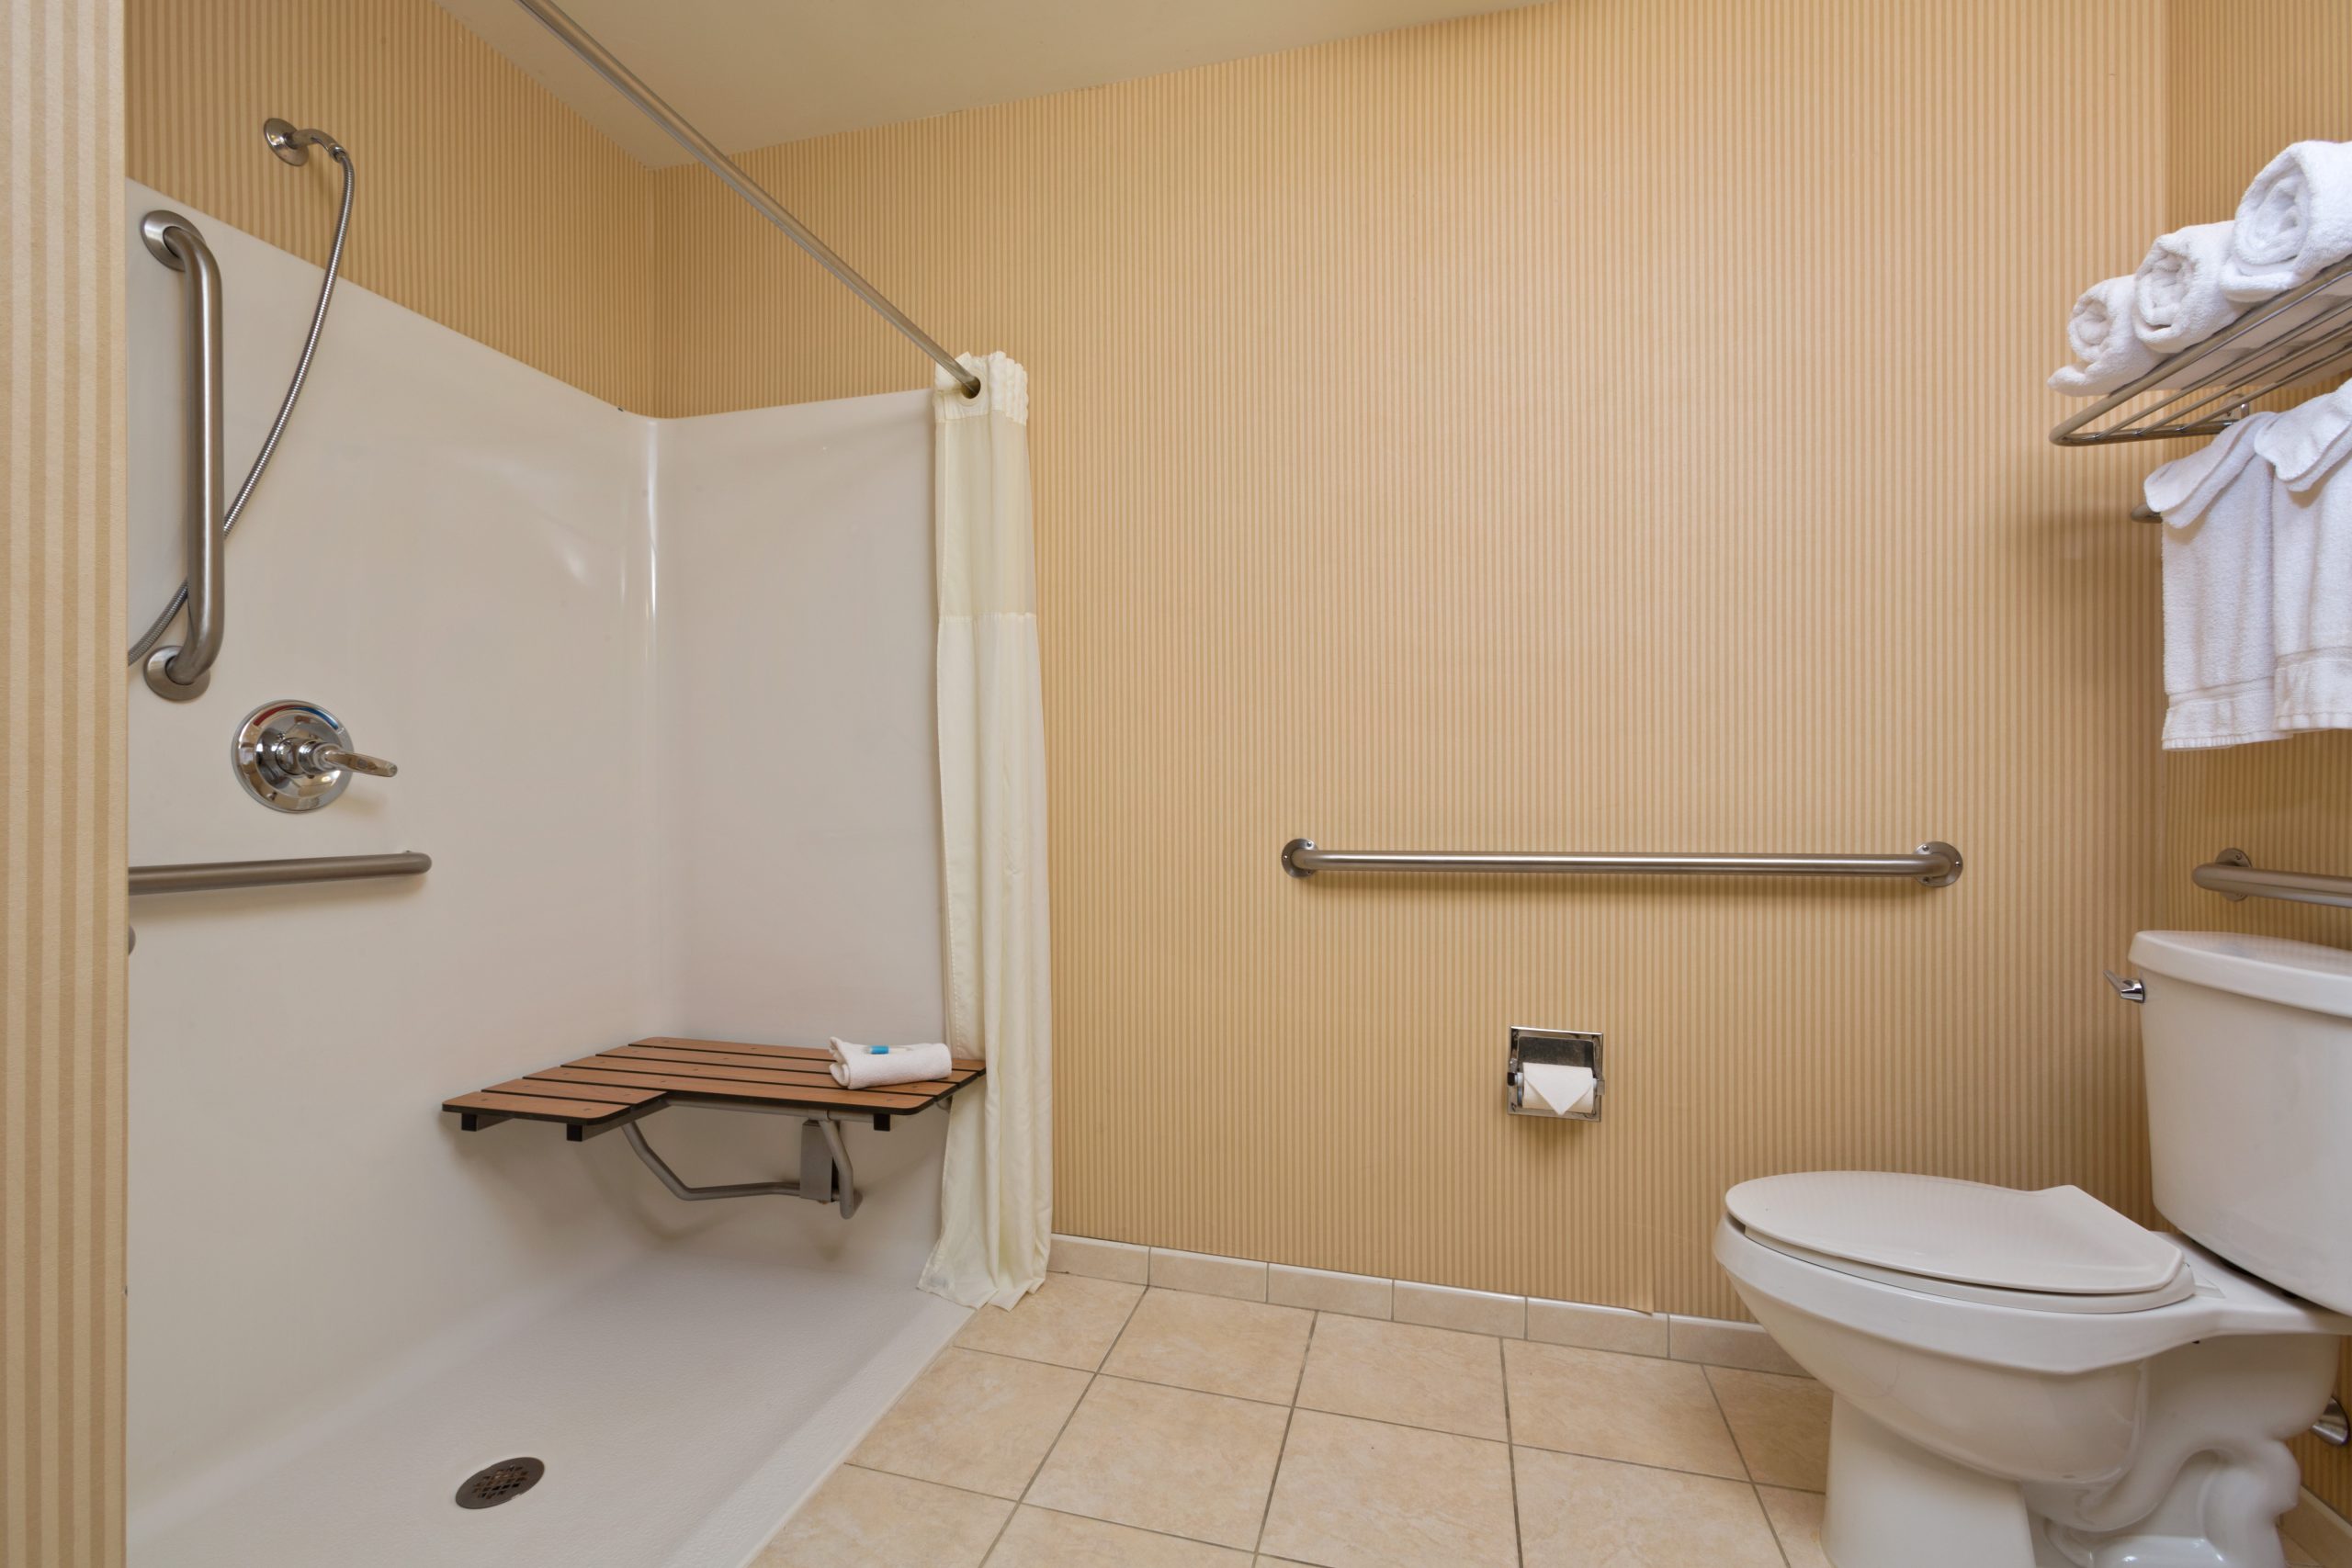 Grand Hotel Handicap Bathroom with accessible seated shower